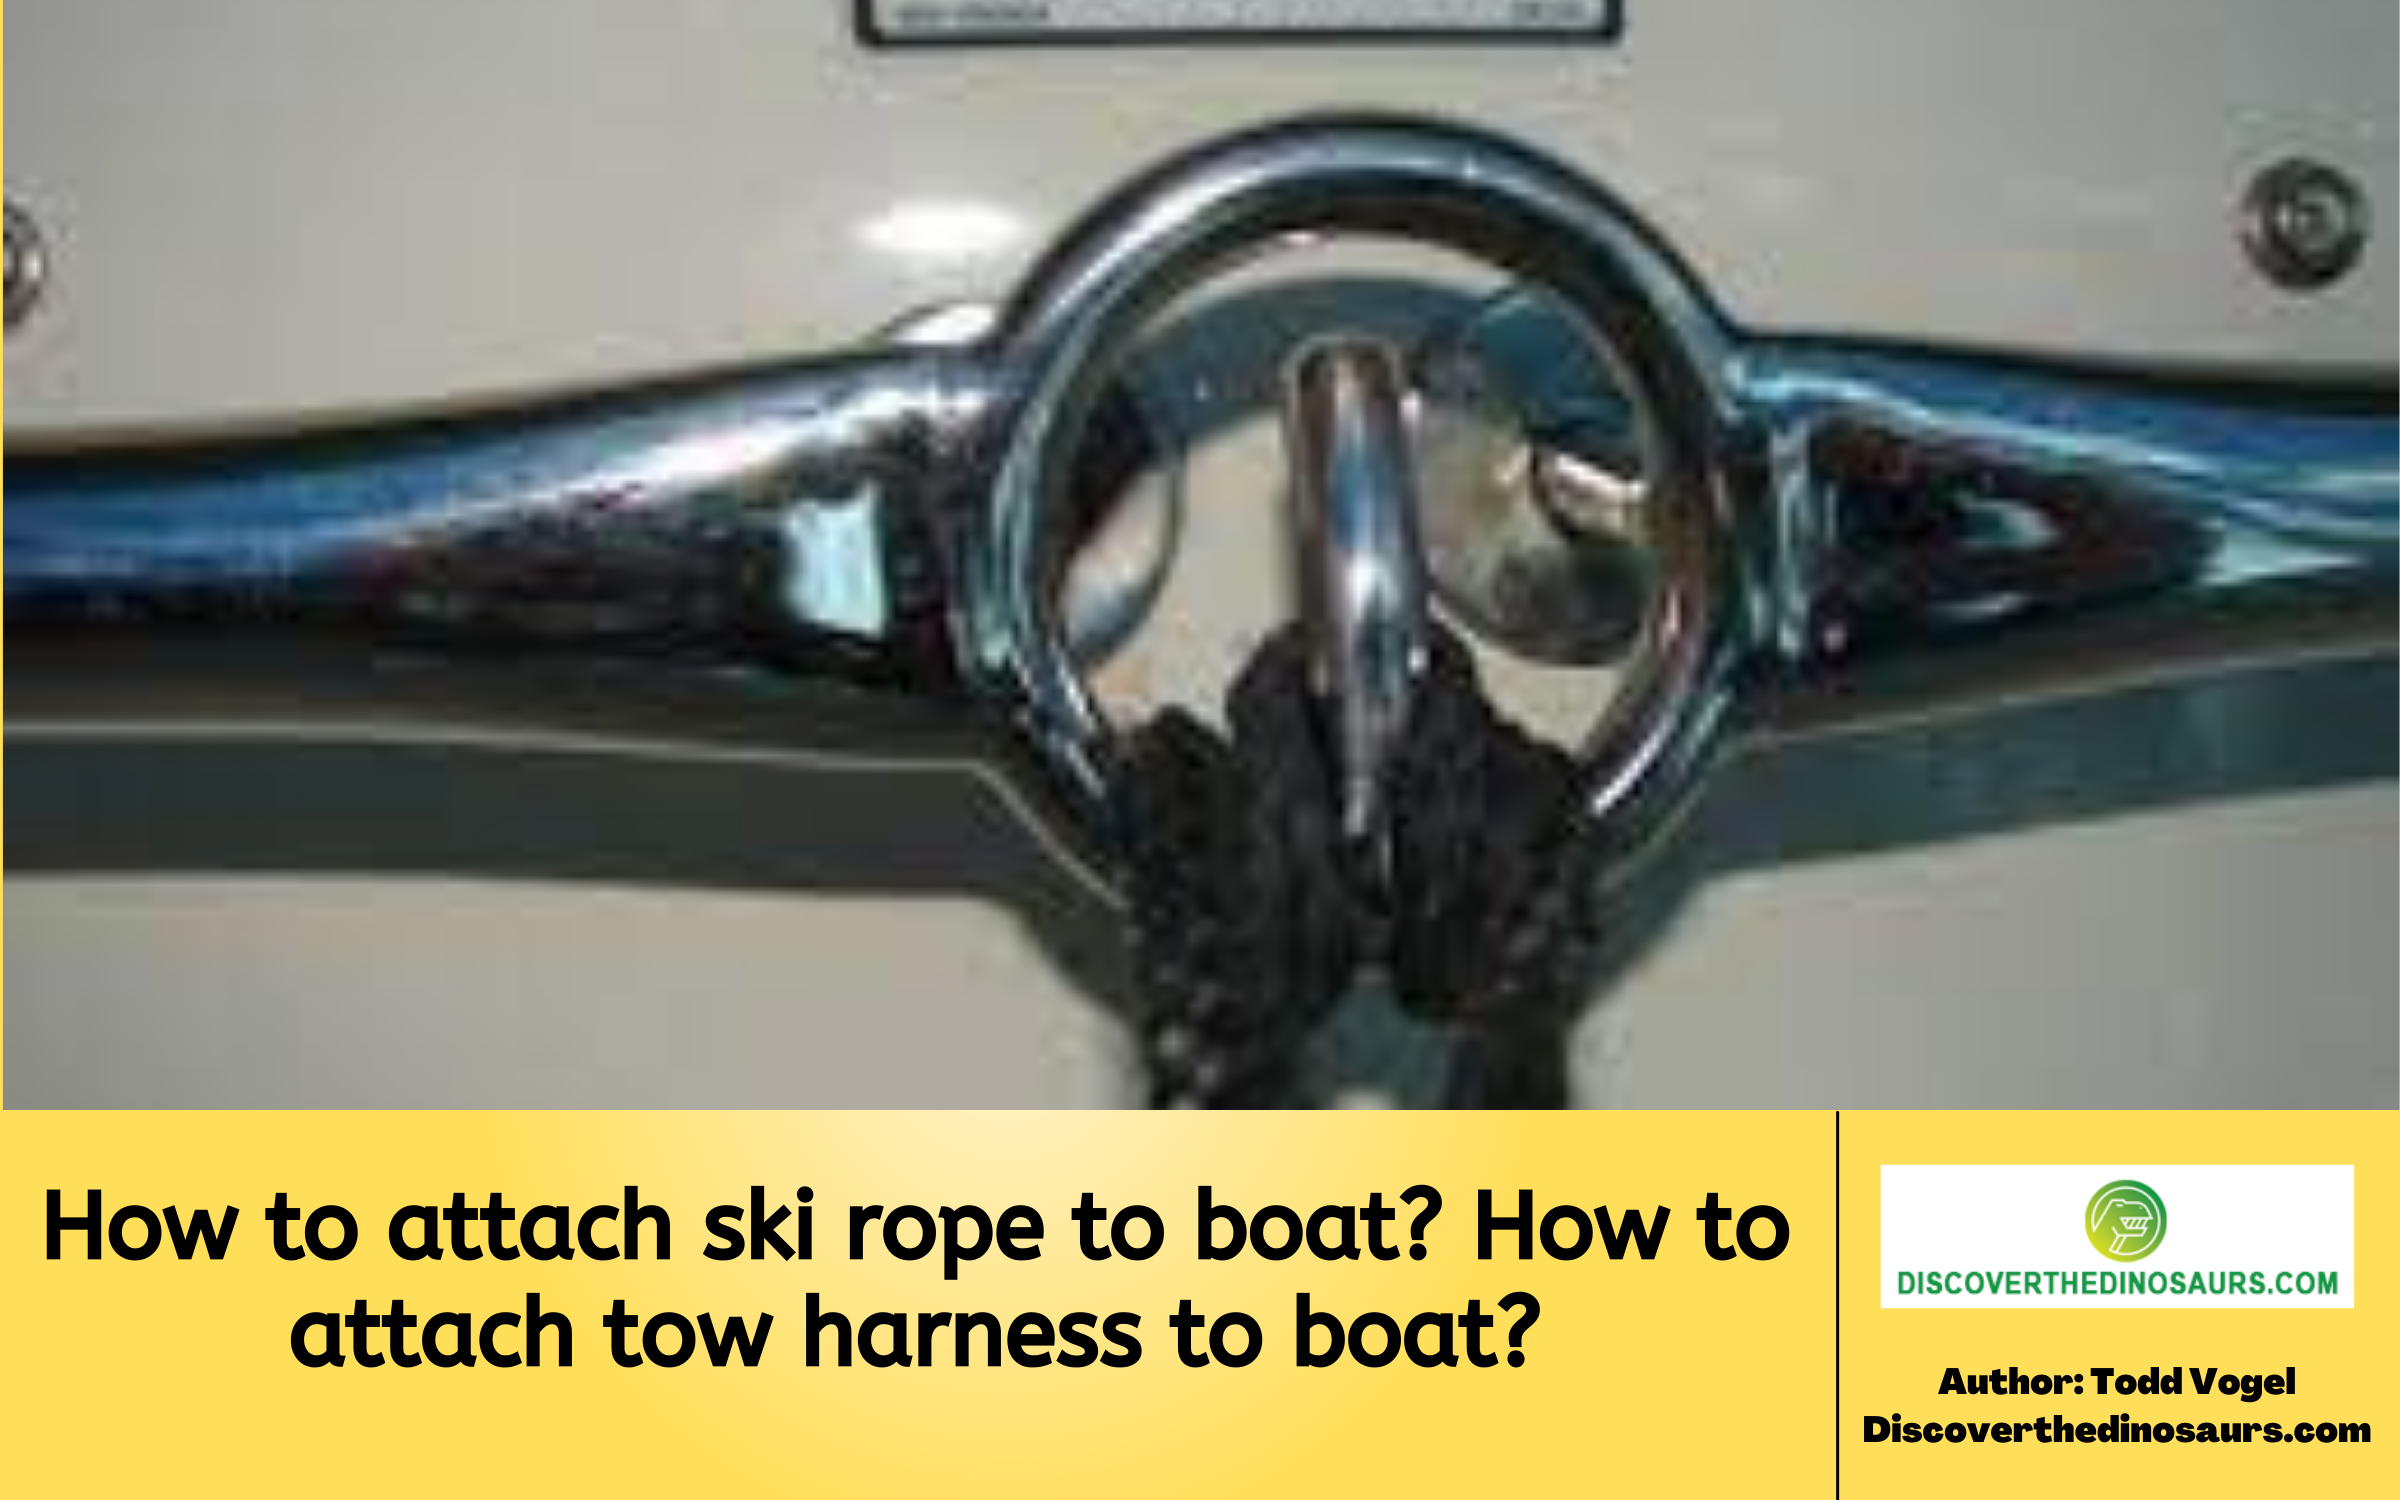 How to attach ski rope to boat? How to attach tow harness to boat?